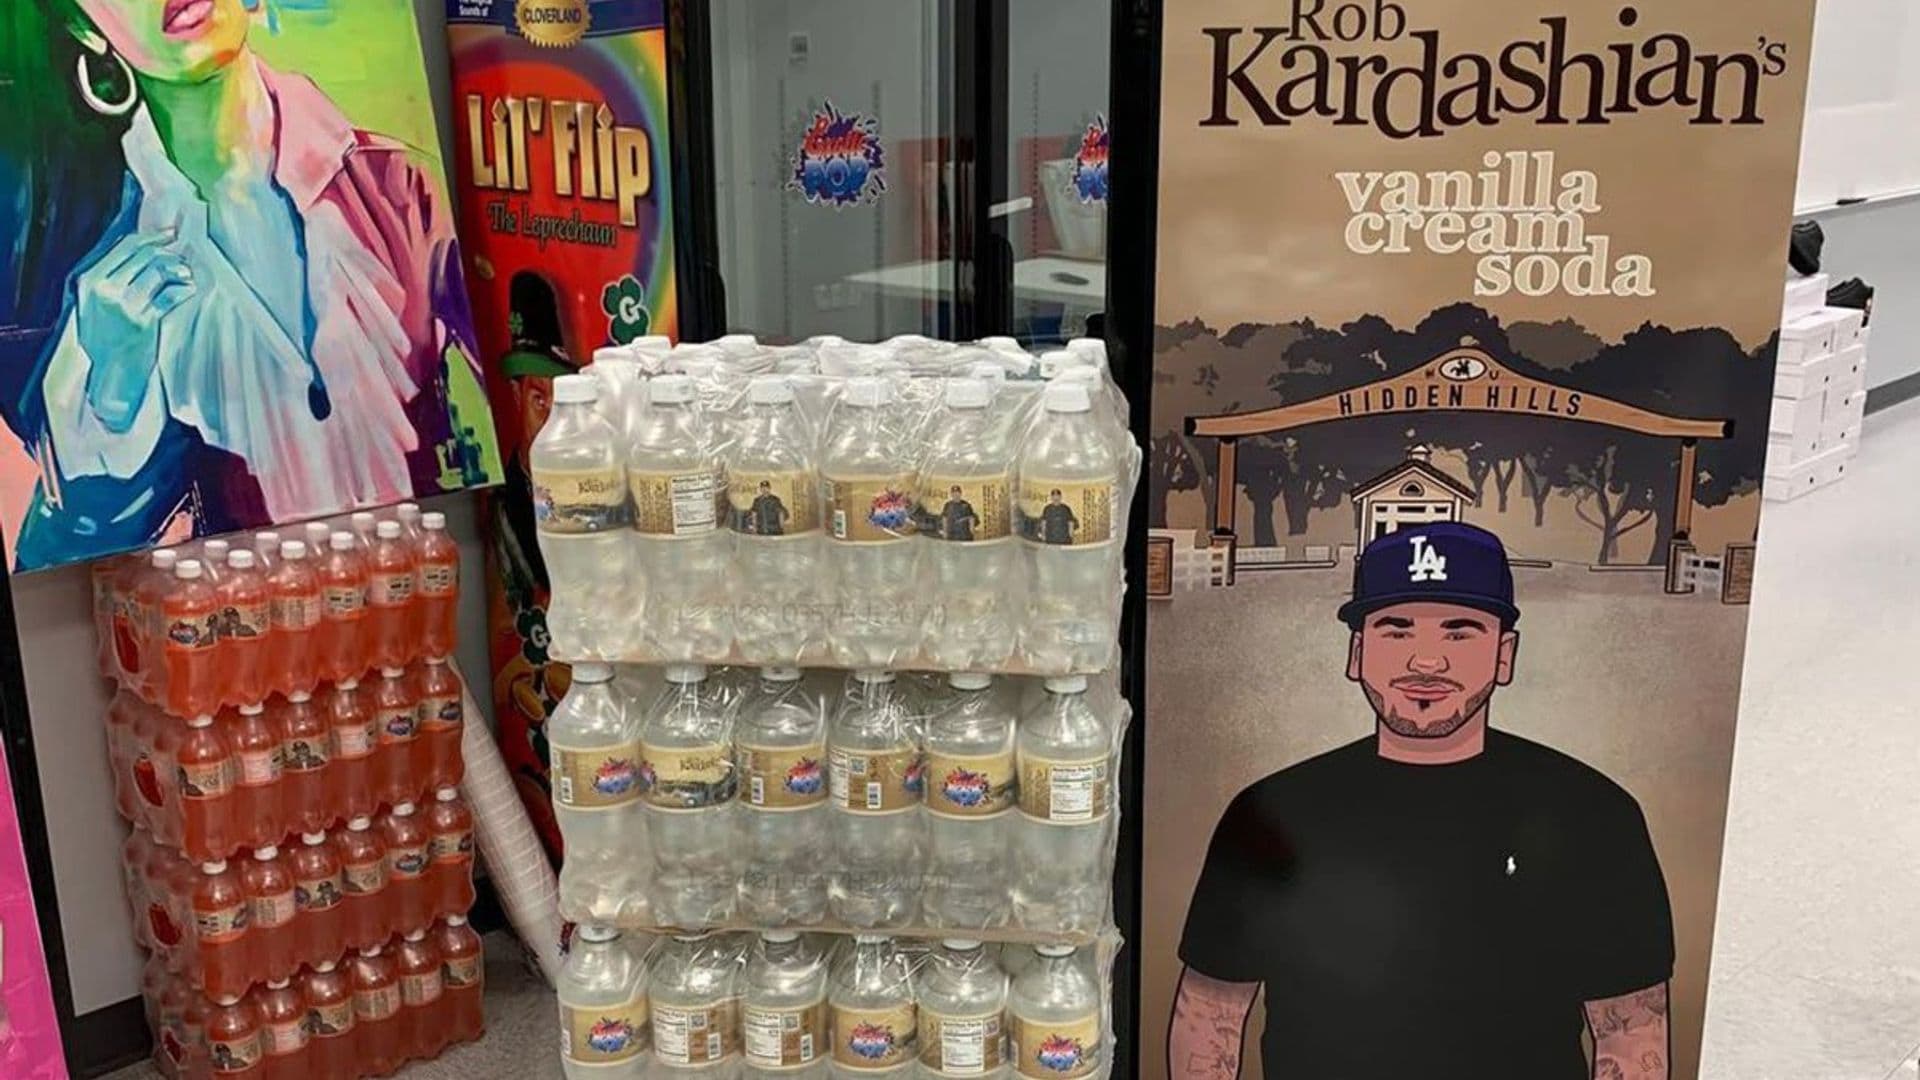 Rob Kardashian just unveiled his very own soda flavor